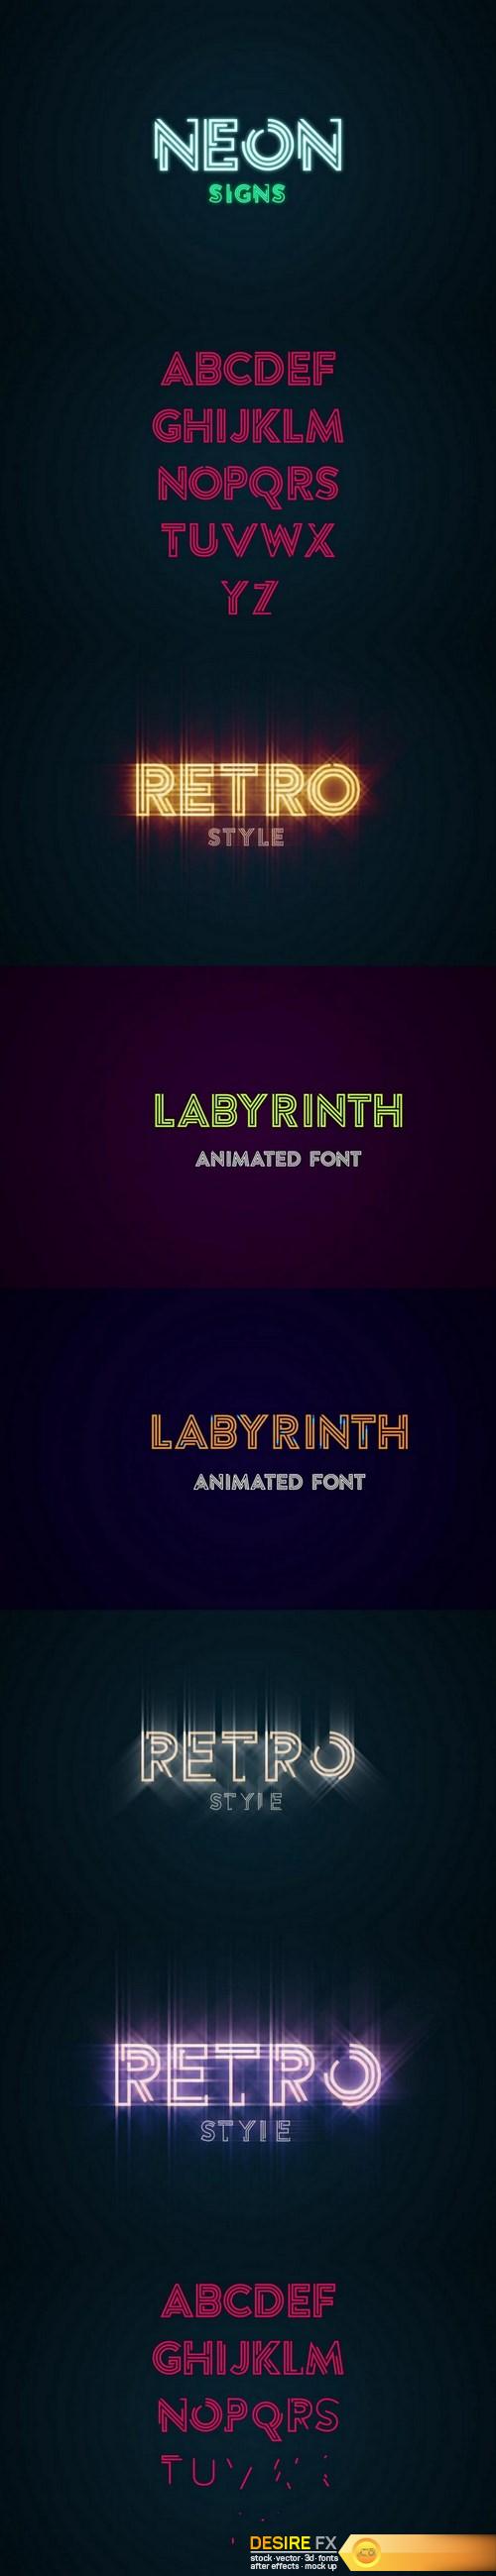 Videohive 18527773 Labyrinth Animated Font